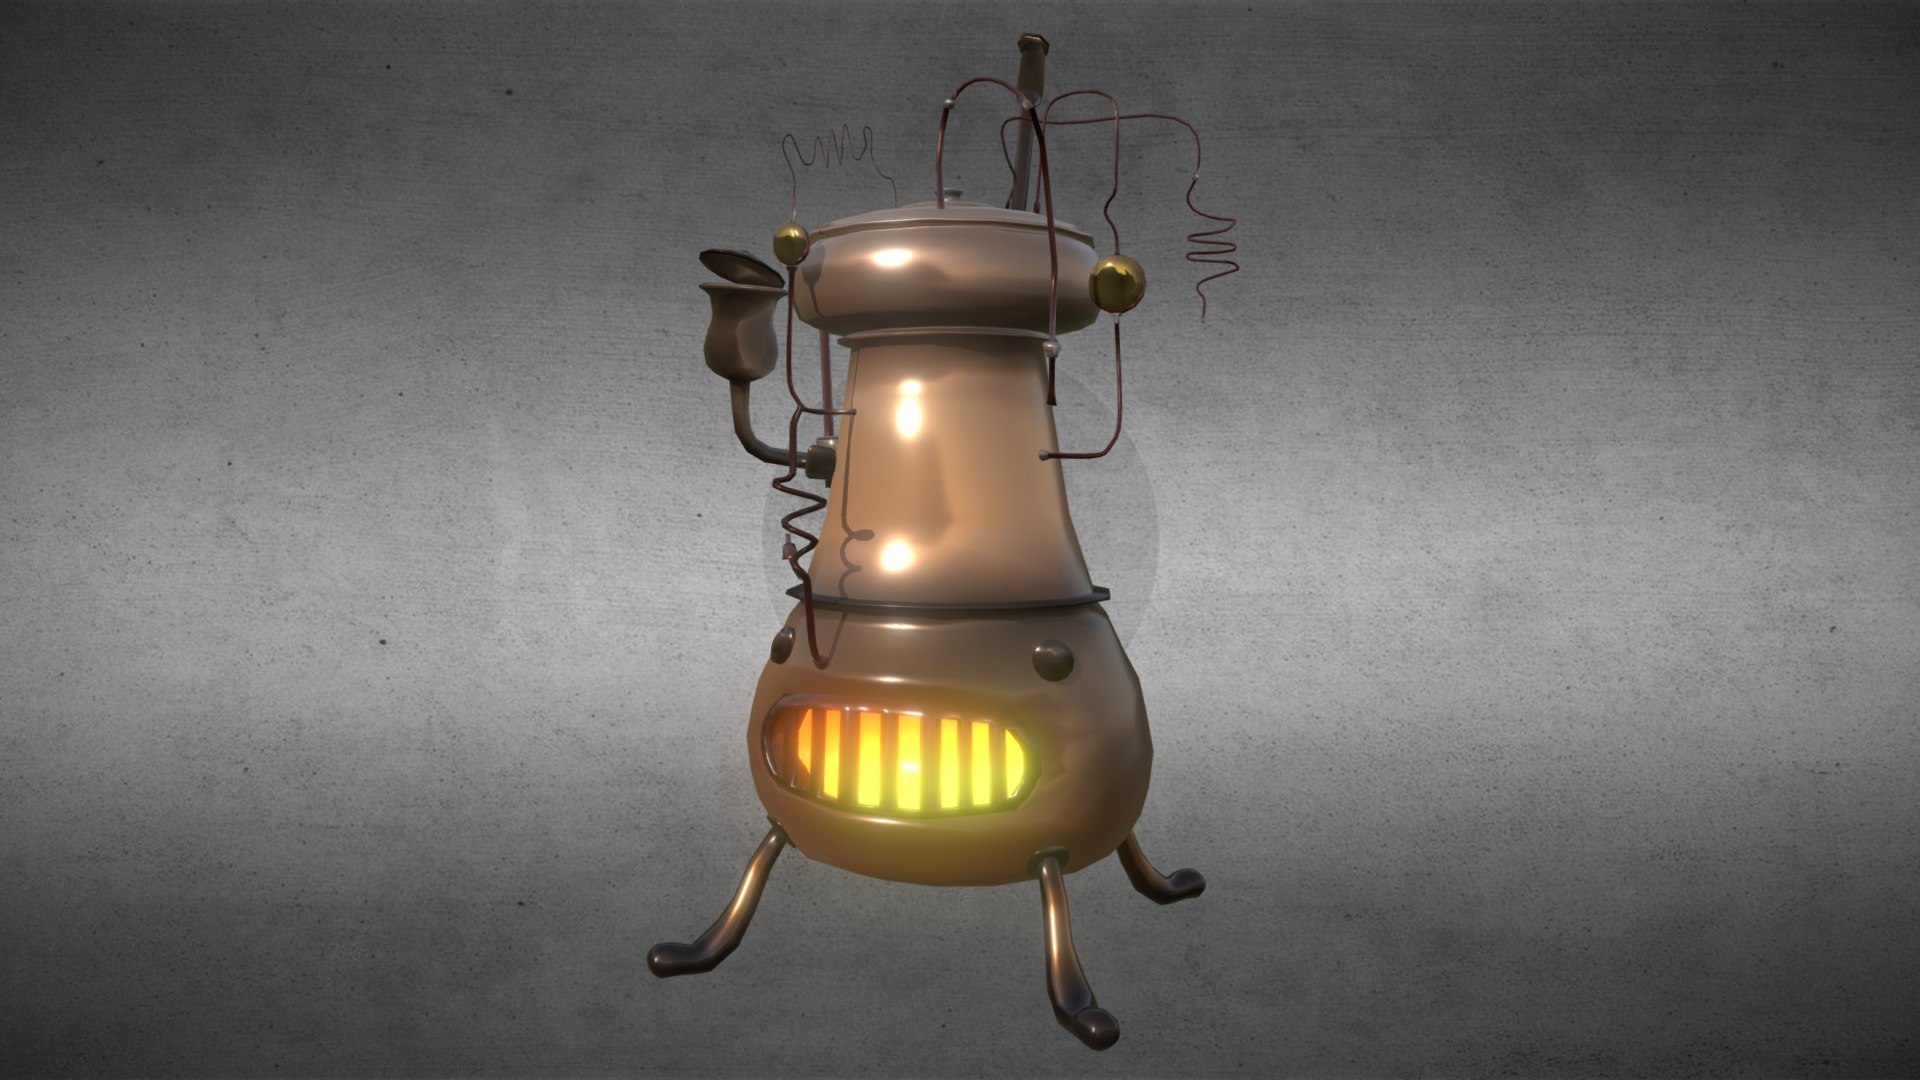 Steampunk style furnace asset made of the game Legends of Iona RPG.
Models made with 3dsmax
Normals sculpted with Zbrush
Substance Painter was used for all textures and baking - Game Asset: Steampunk Furnace - 3D model by JulienBernier3D 3d model